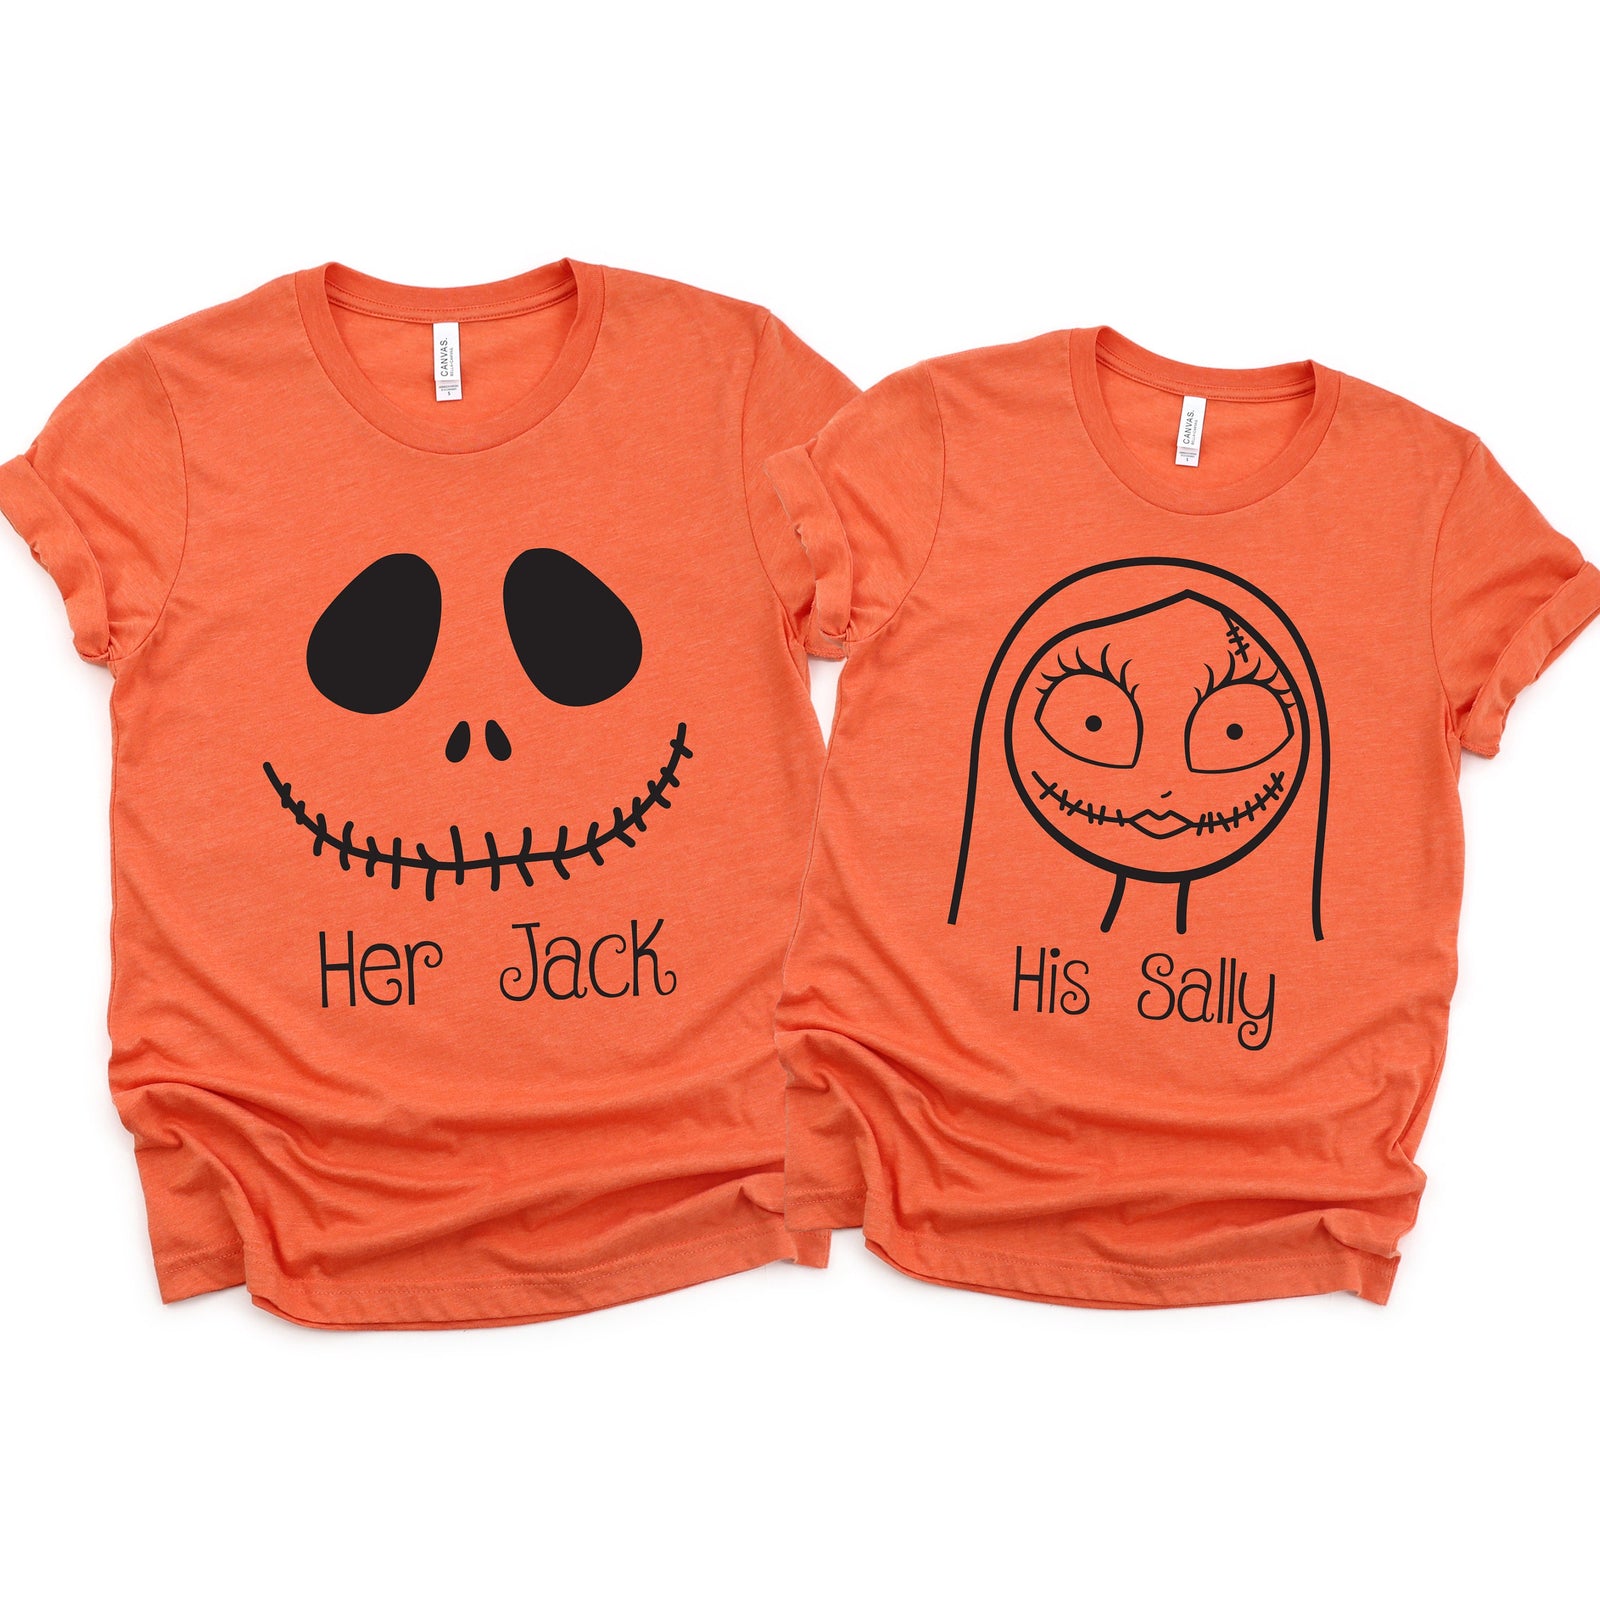 Nightmare Before Christmas - Her Jack and His Sally Shirts - Disney Couples - Matching Shirts - Halloween